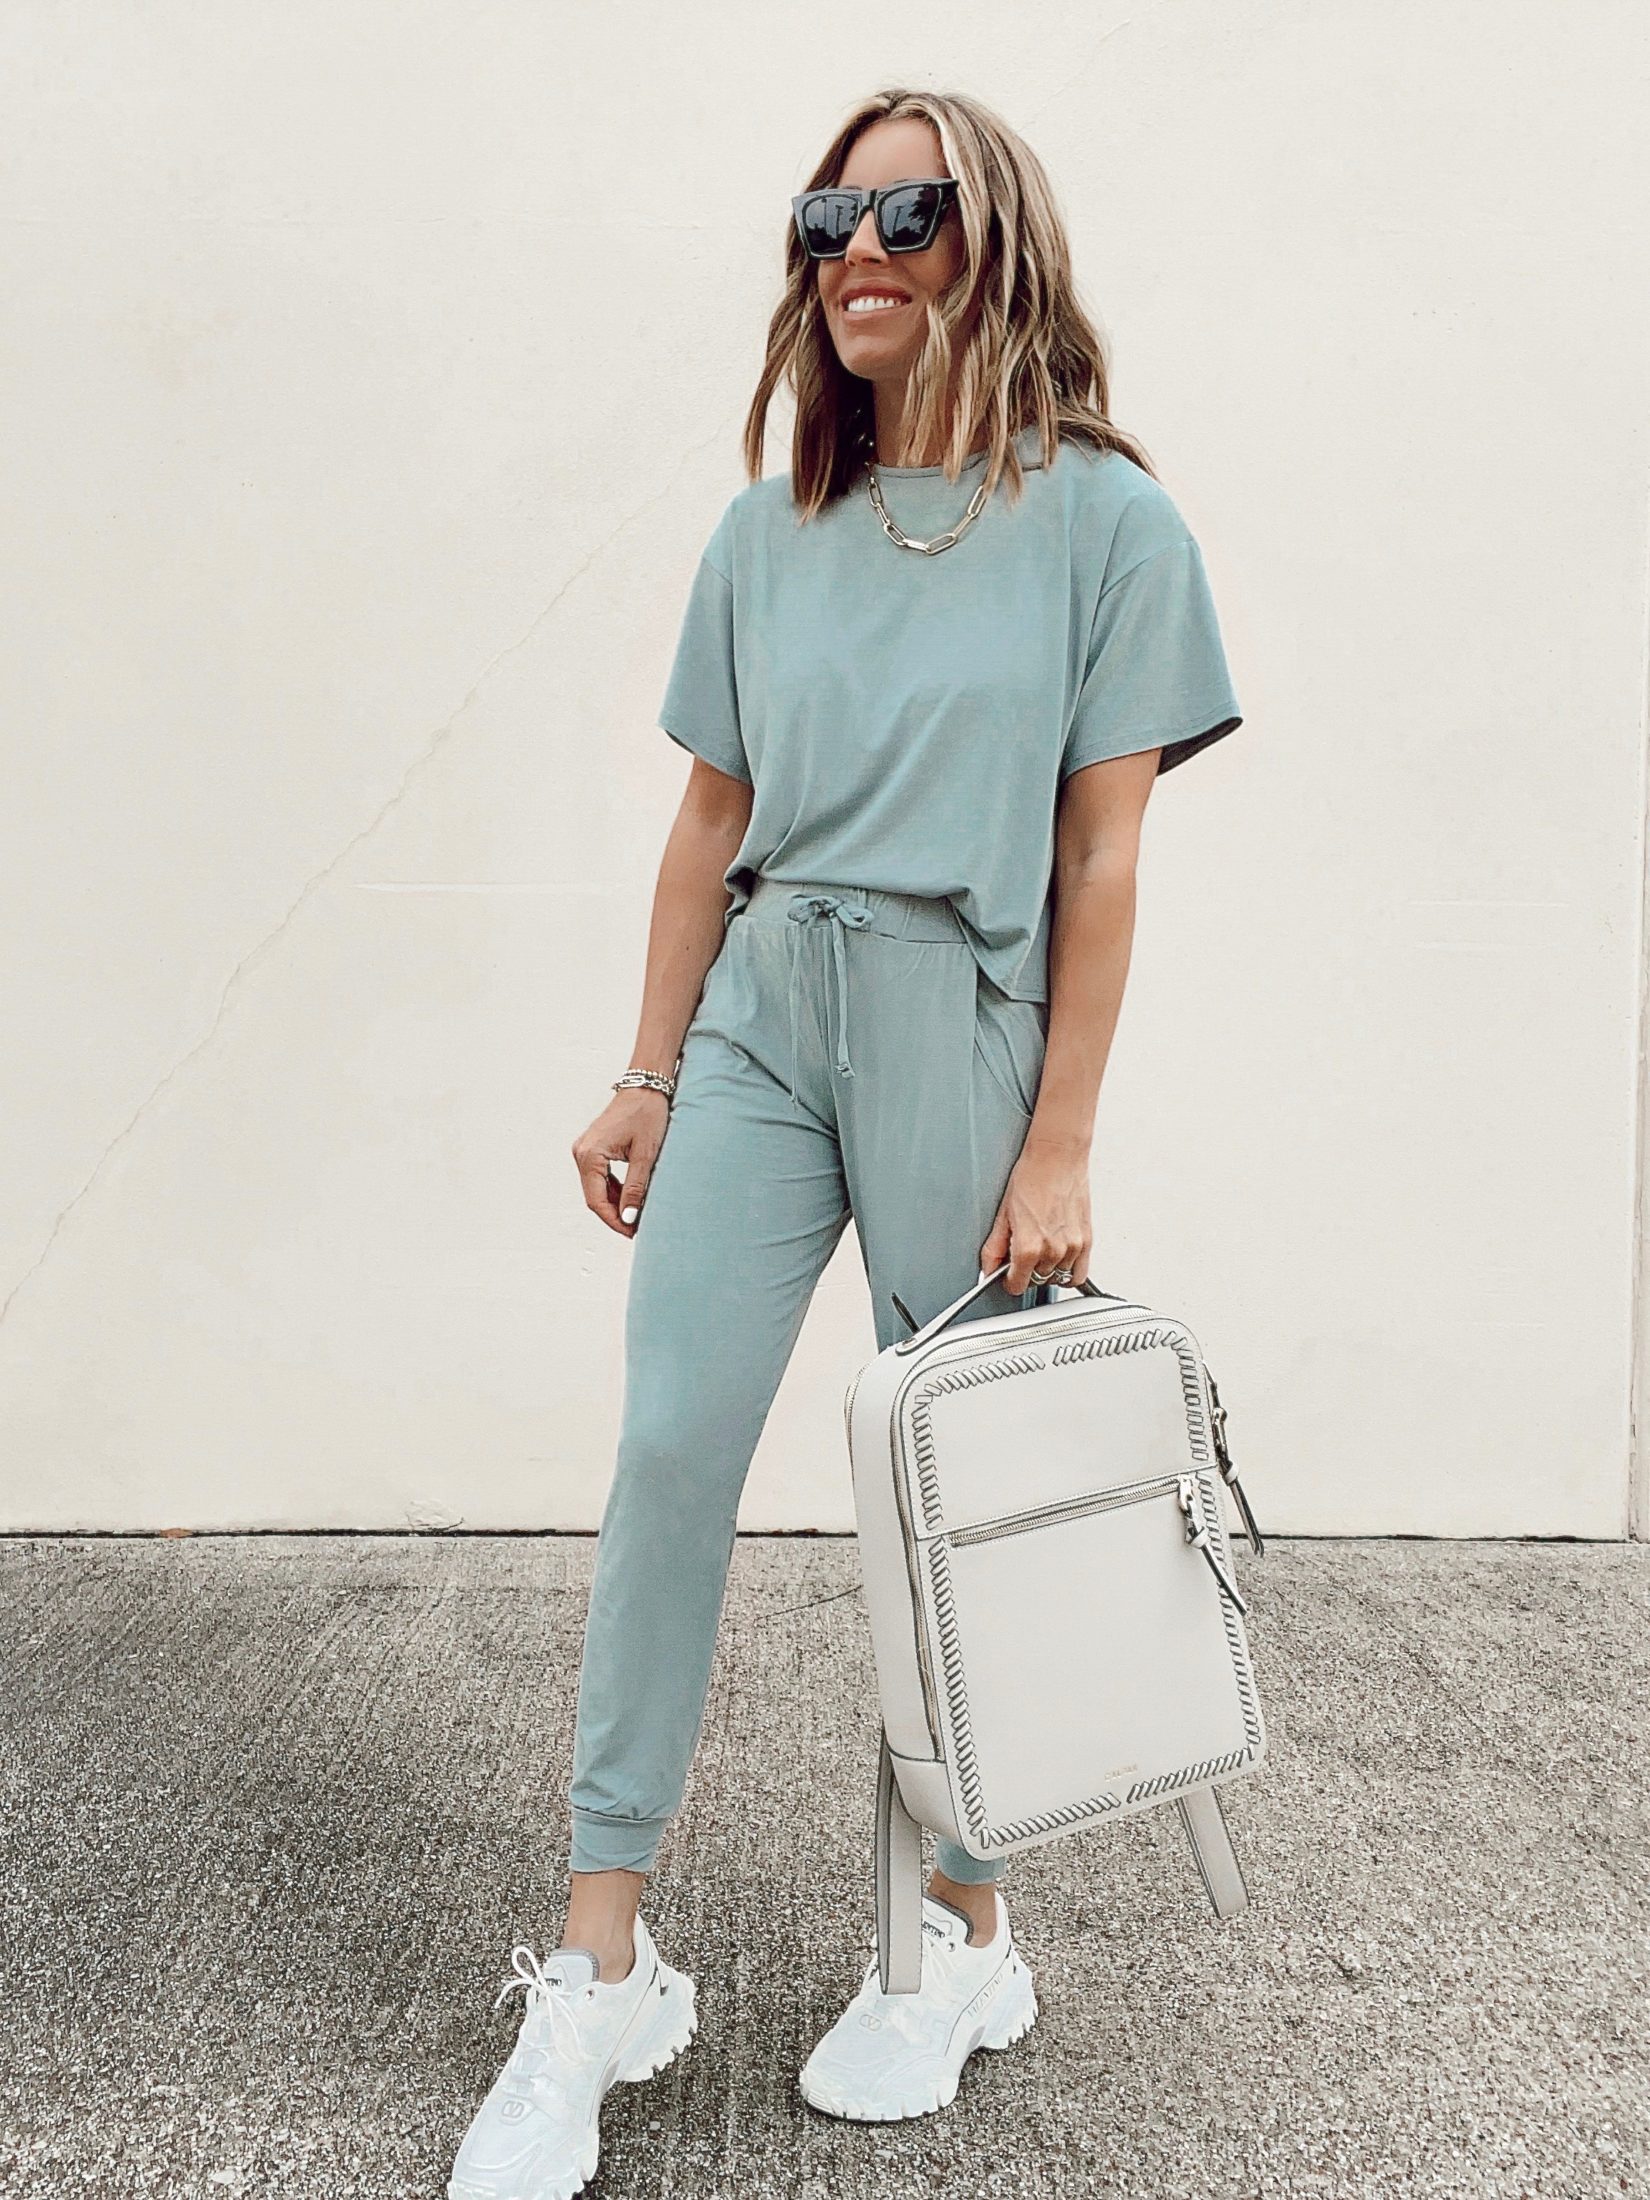 best matching loungewear sets you can wear out in public